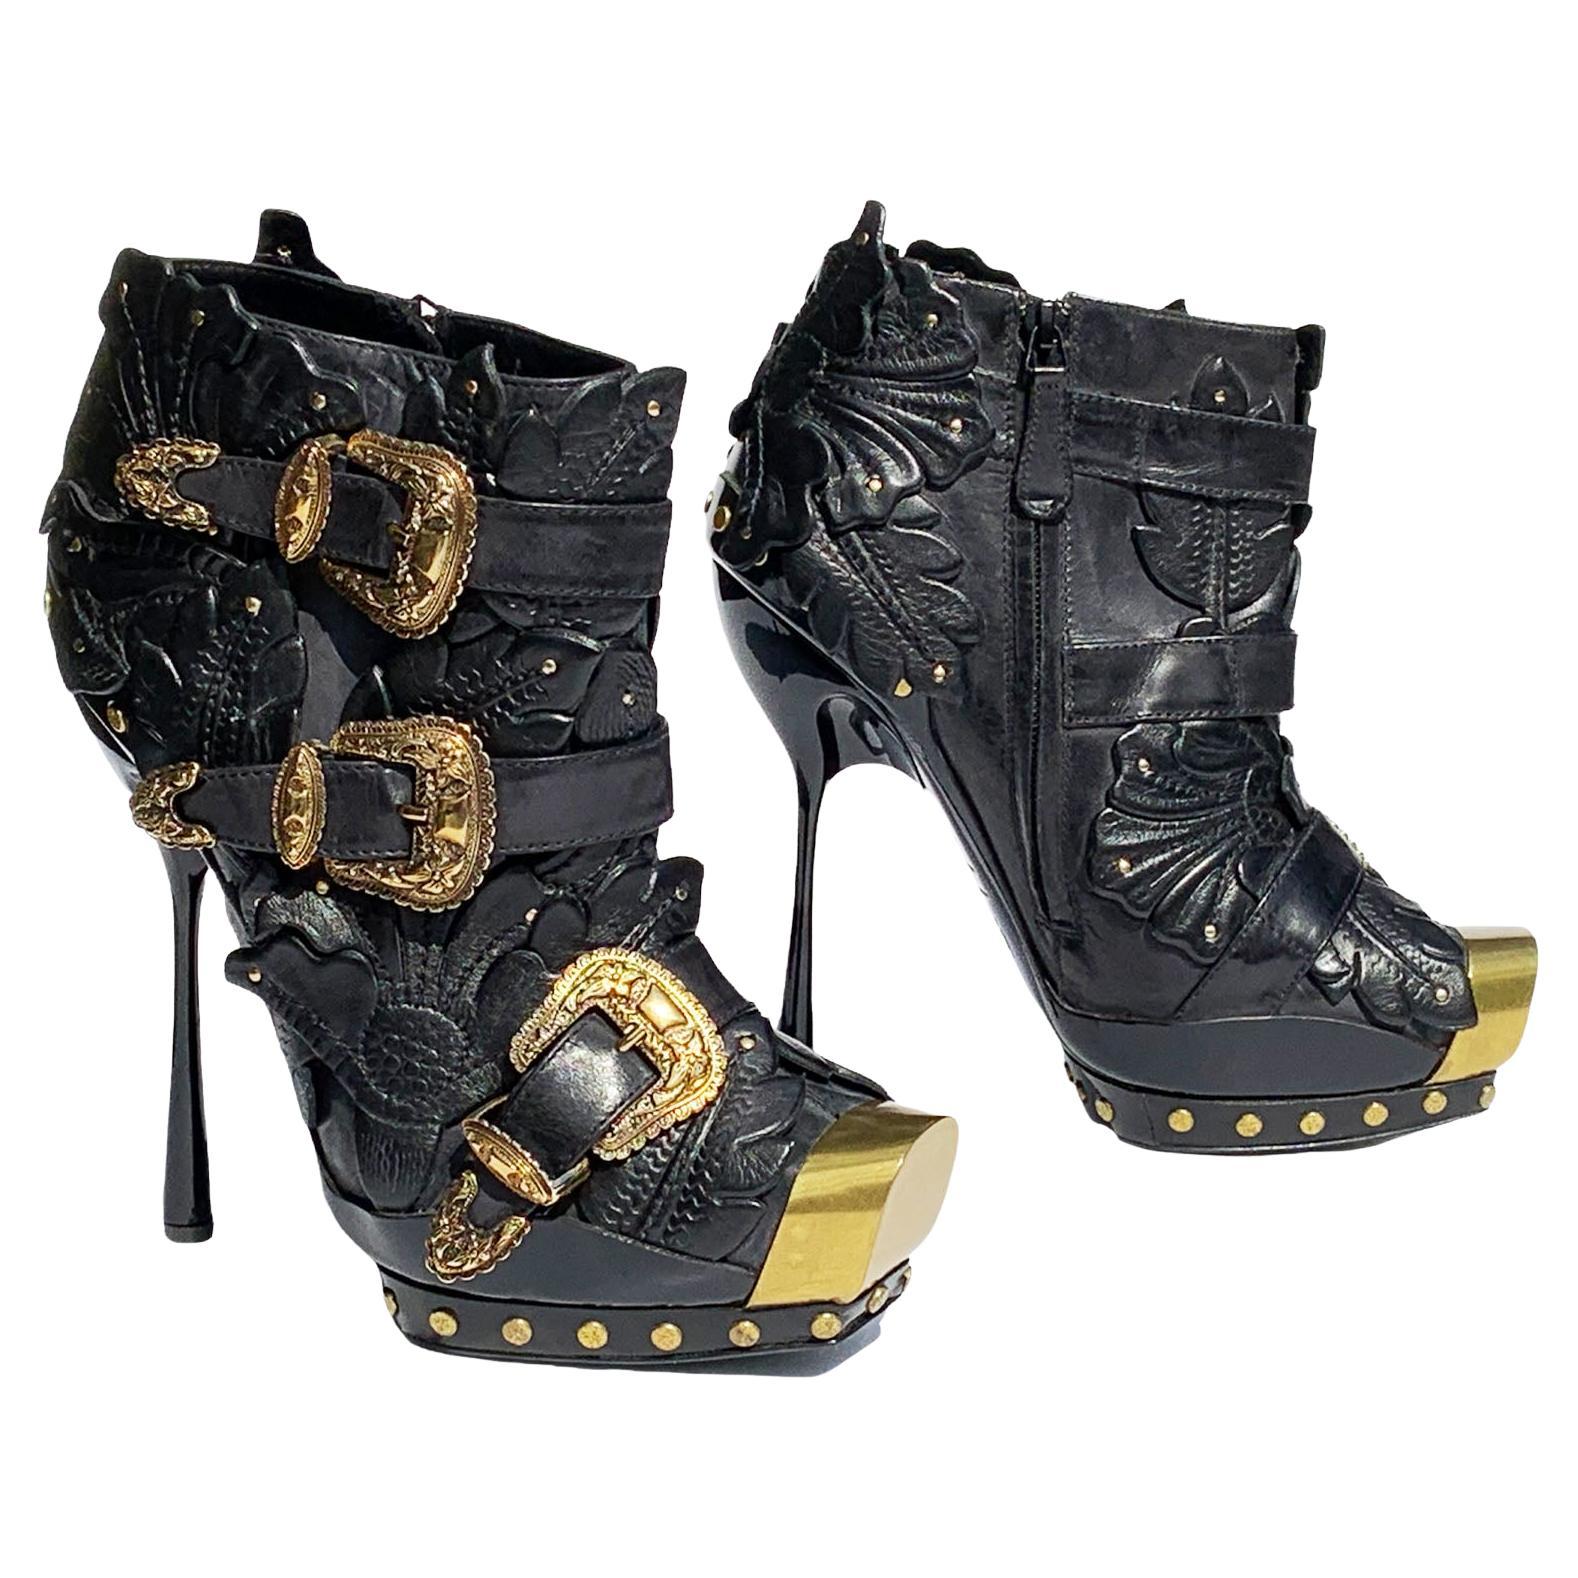 New Alexander McQueen S/S 2011 3D Embellished Studded Ankle Boots 39 US 9 For Sale